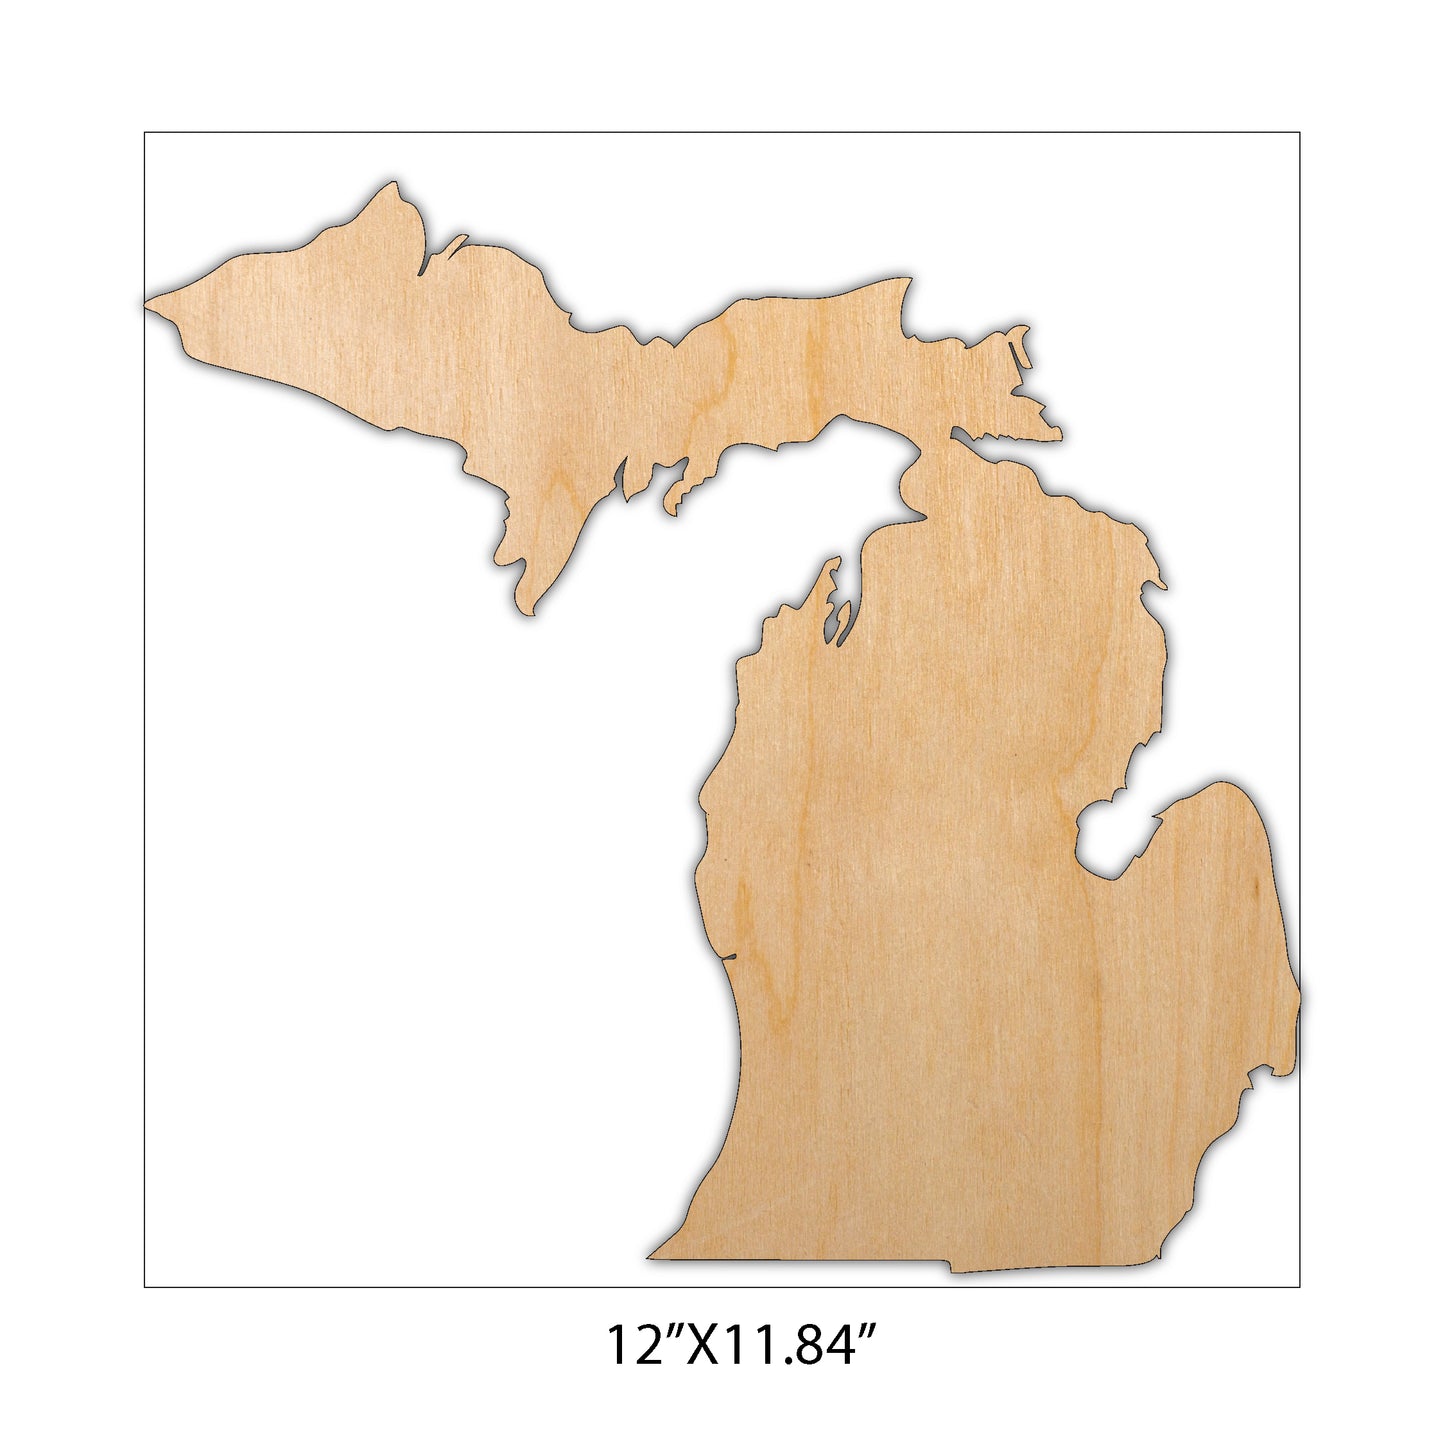 State of Michigan upper and lower blank wood for art, wood blank, blank wood, cut to shape wood